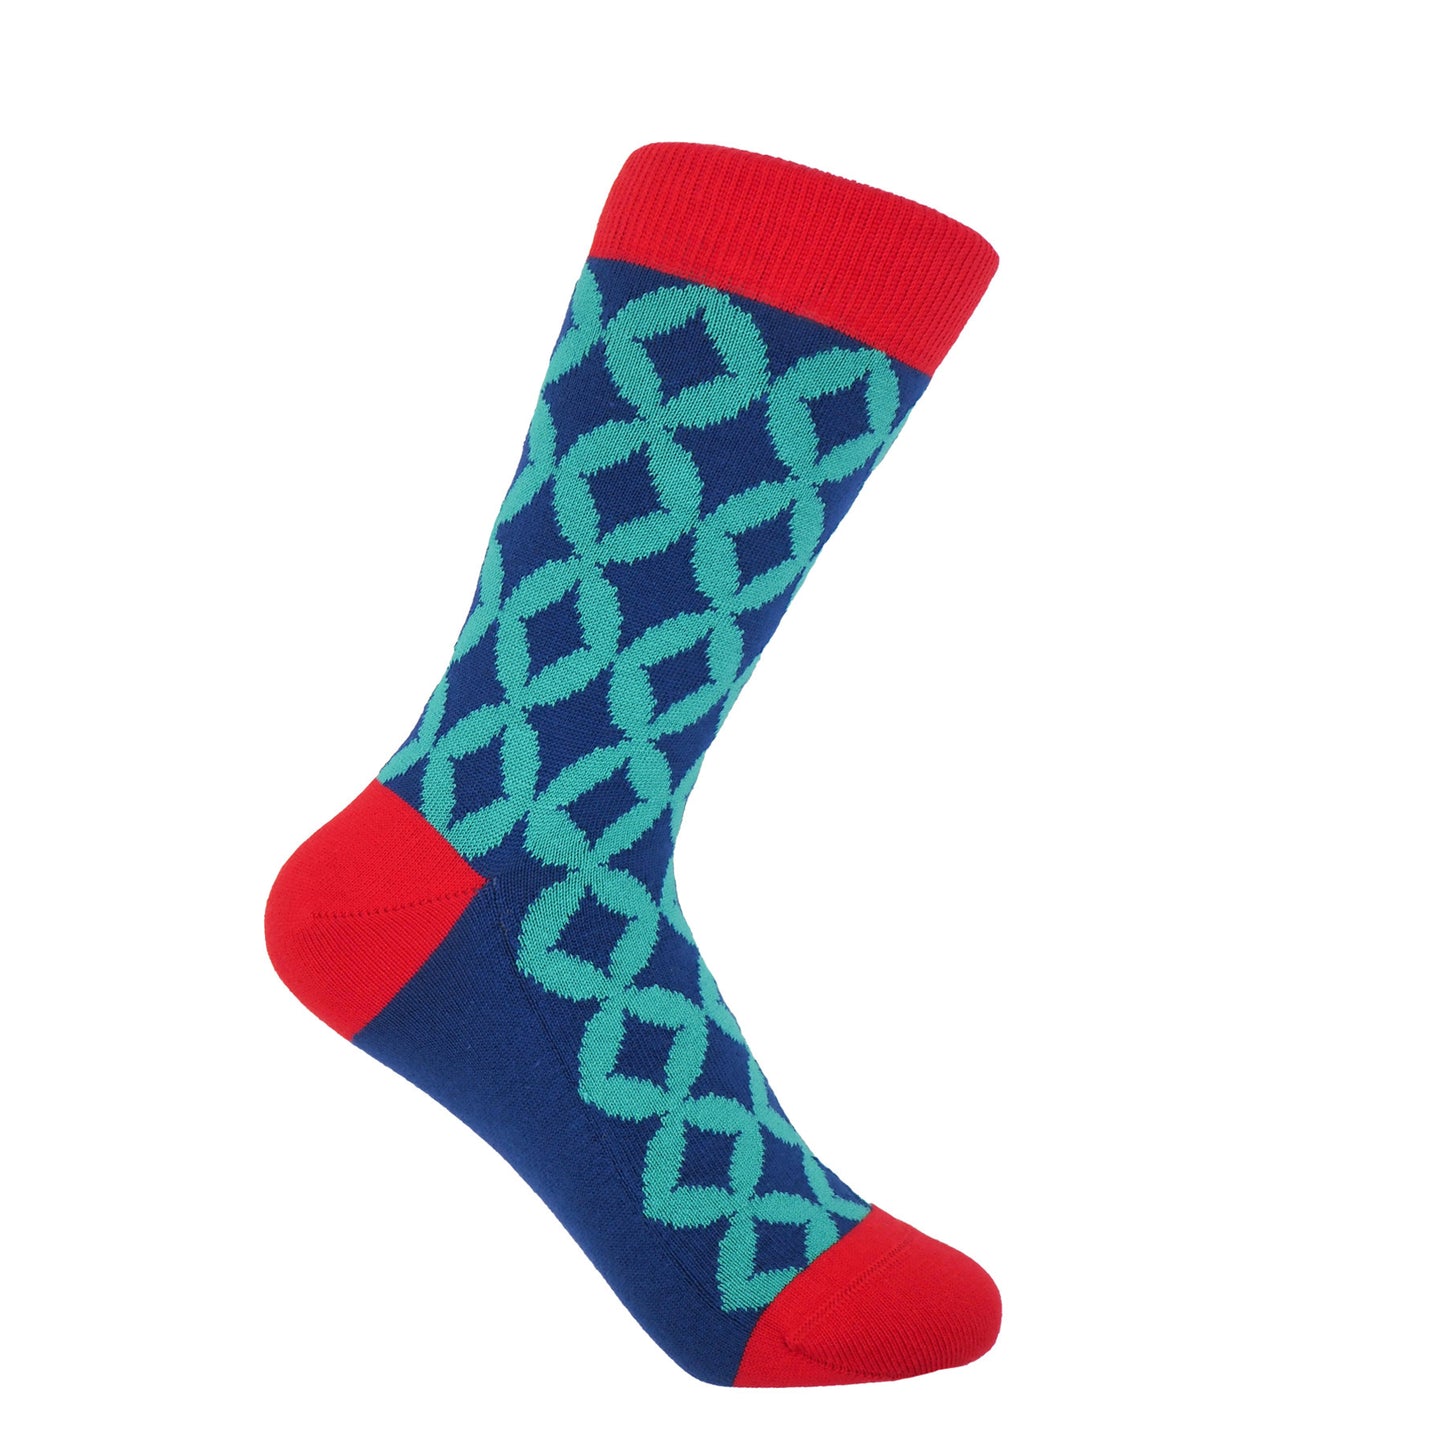 Socks featuring patterns and colours inspired by Iznik tiles